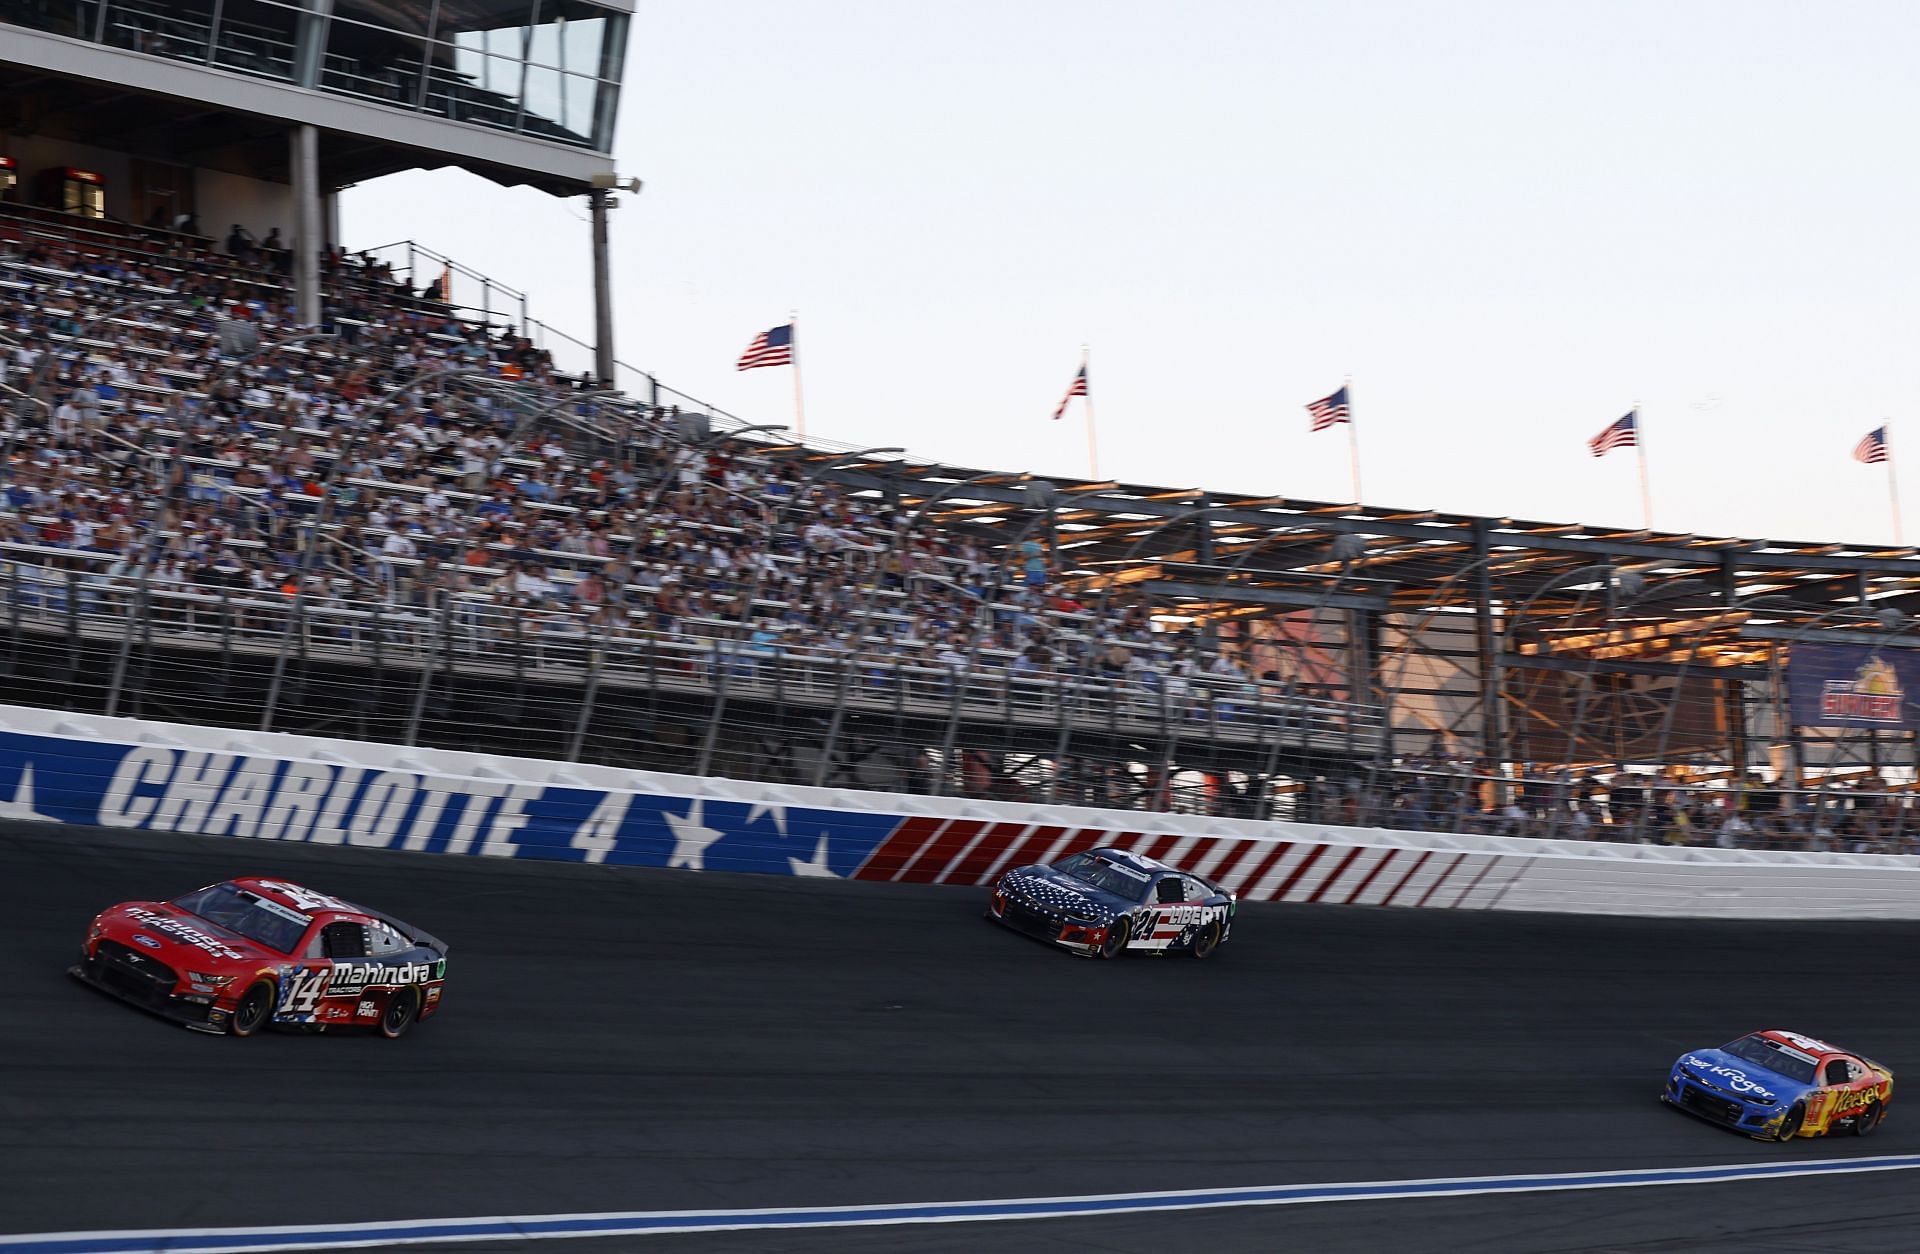 Chase Briscoe, William Byron, and Ricky Stenhouse Jr. race during the NASCAR Cup Series Coca-Cola 600 at Charlotte Motor Speedway (Photo by Jared C. Tilton/Getty Images)